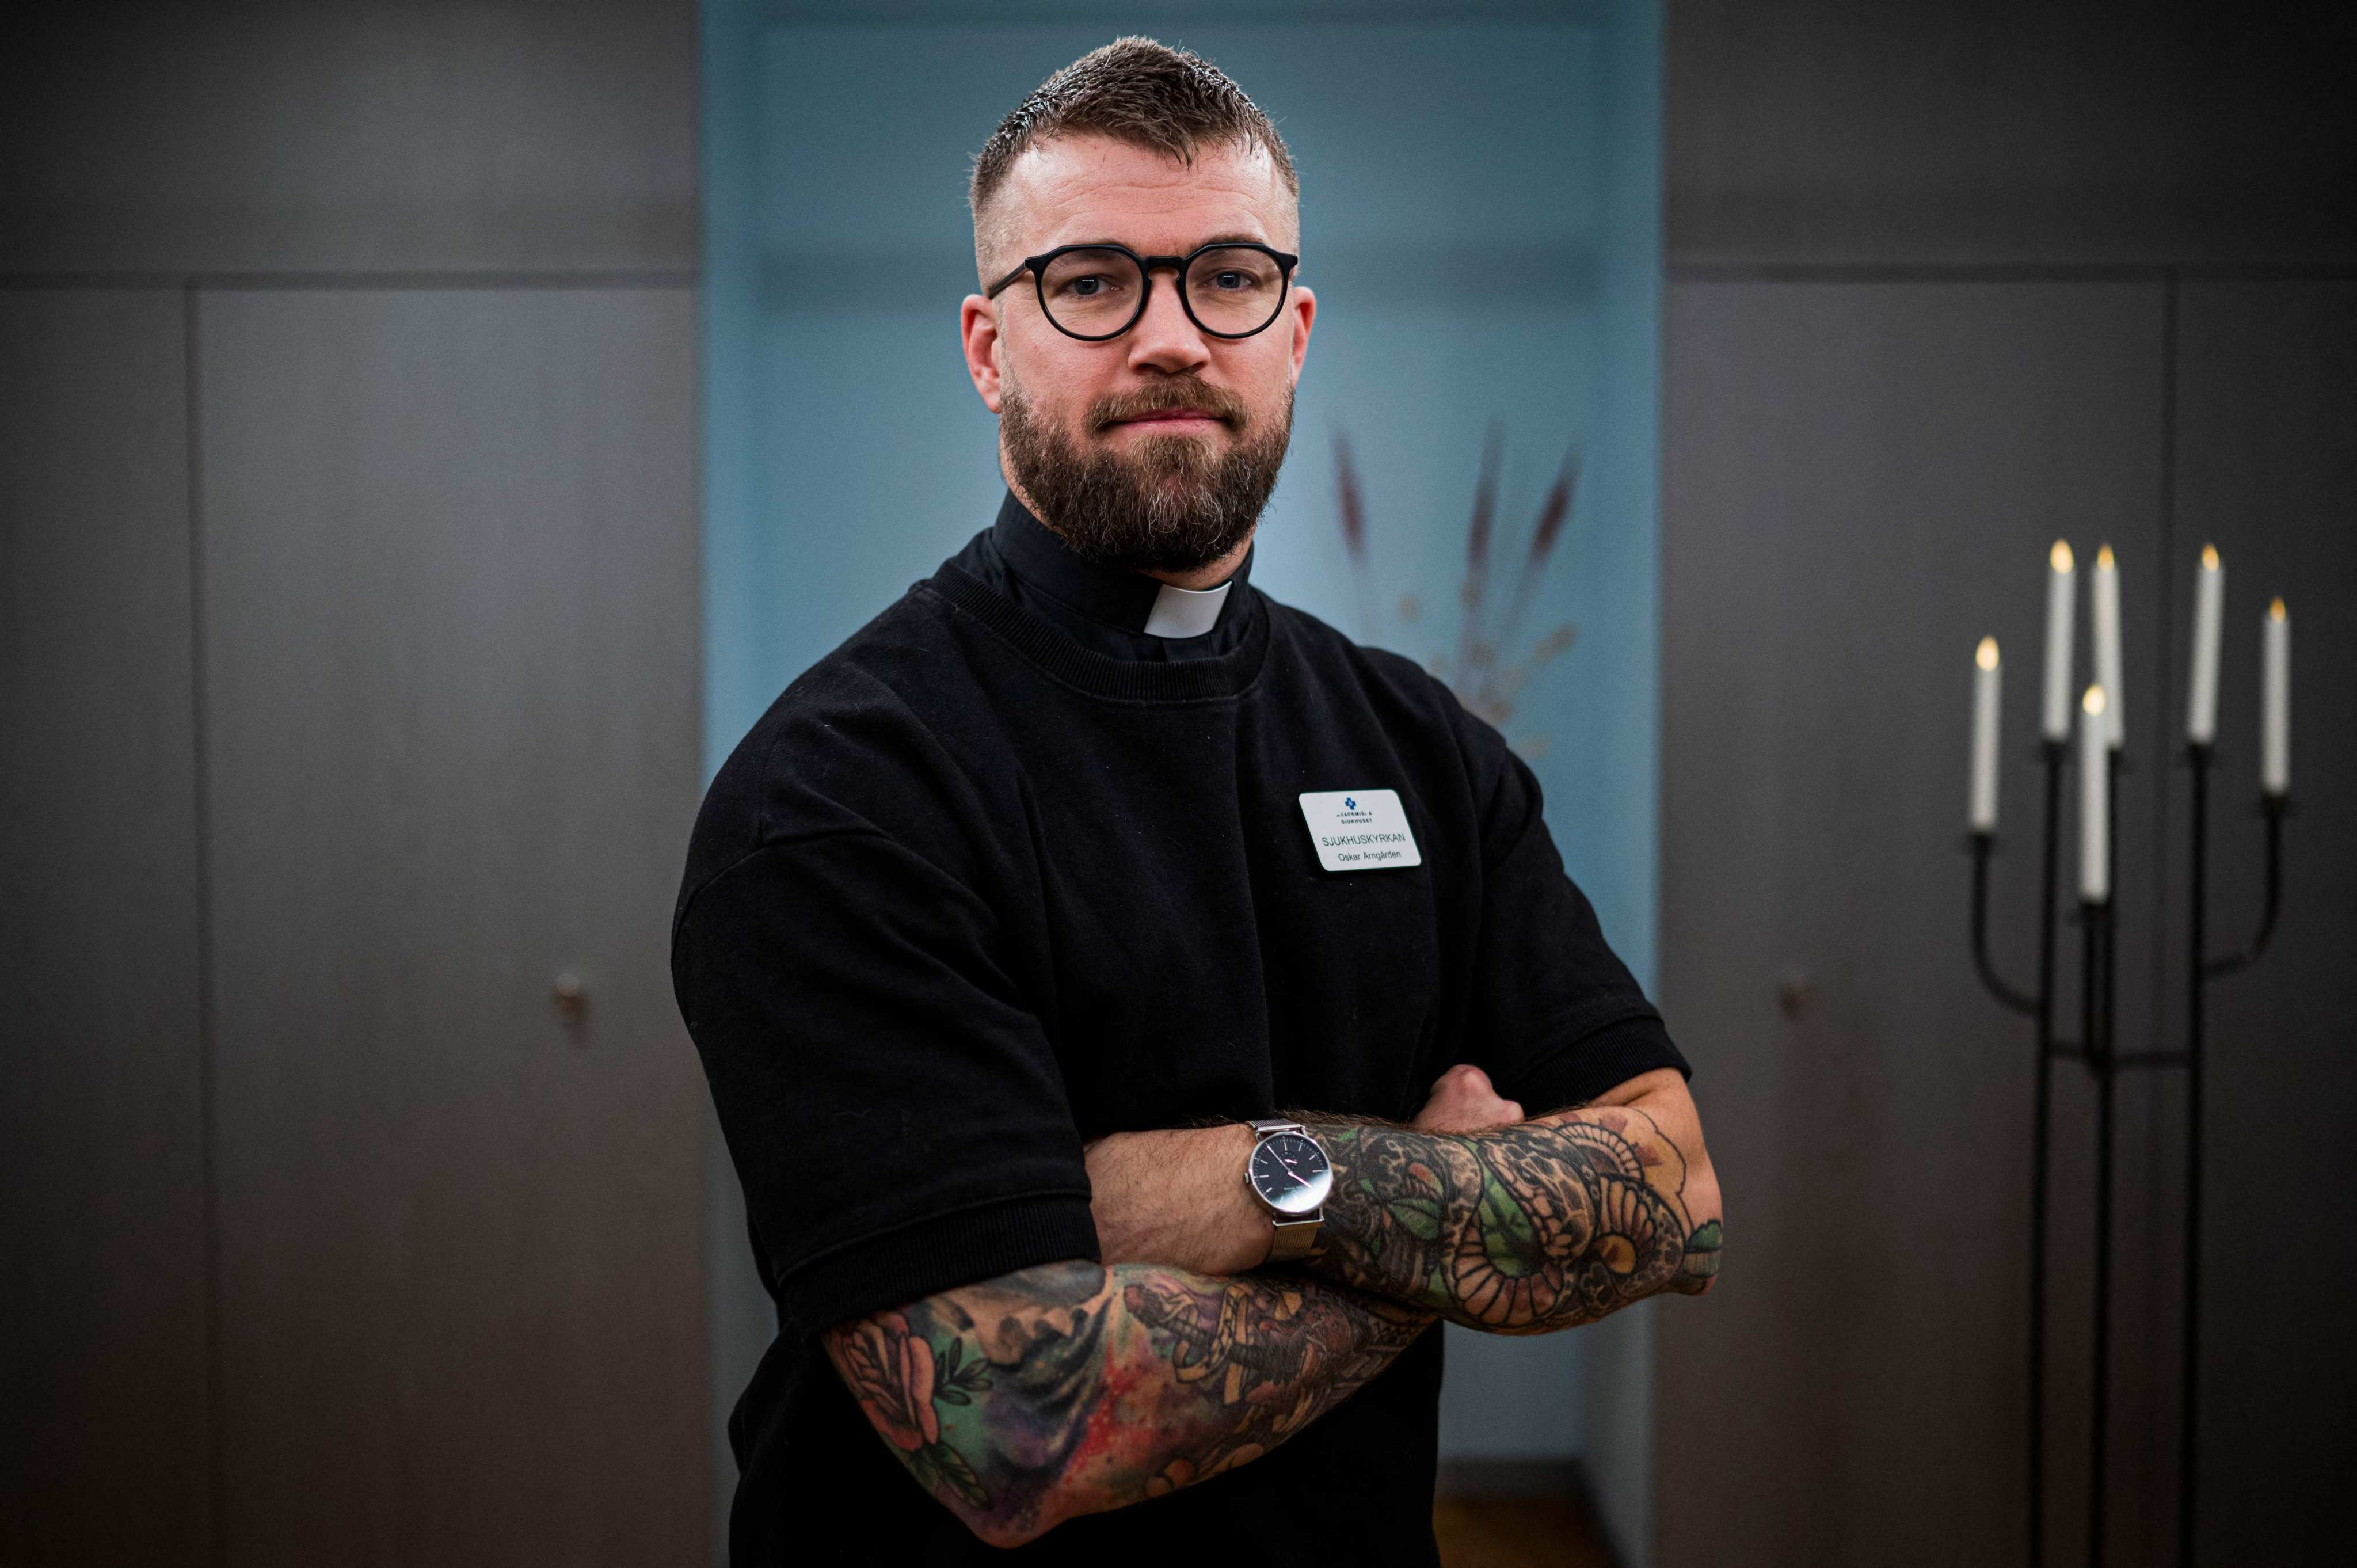 Oskar Arngarden, a 38-year-old Swedish Lutheran Church priest, says social media can be a good place to talk about “faith and health, and … our existential, mental health”. He posts spiritual advice and videos of himself working out. Photo: AFP